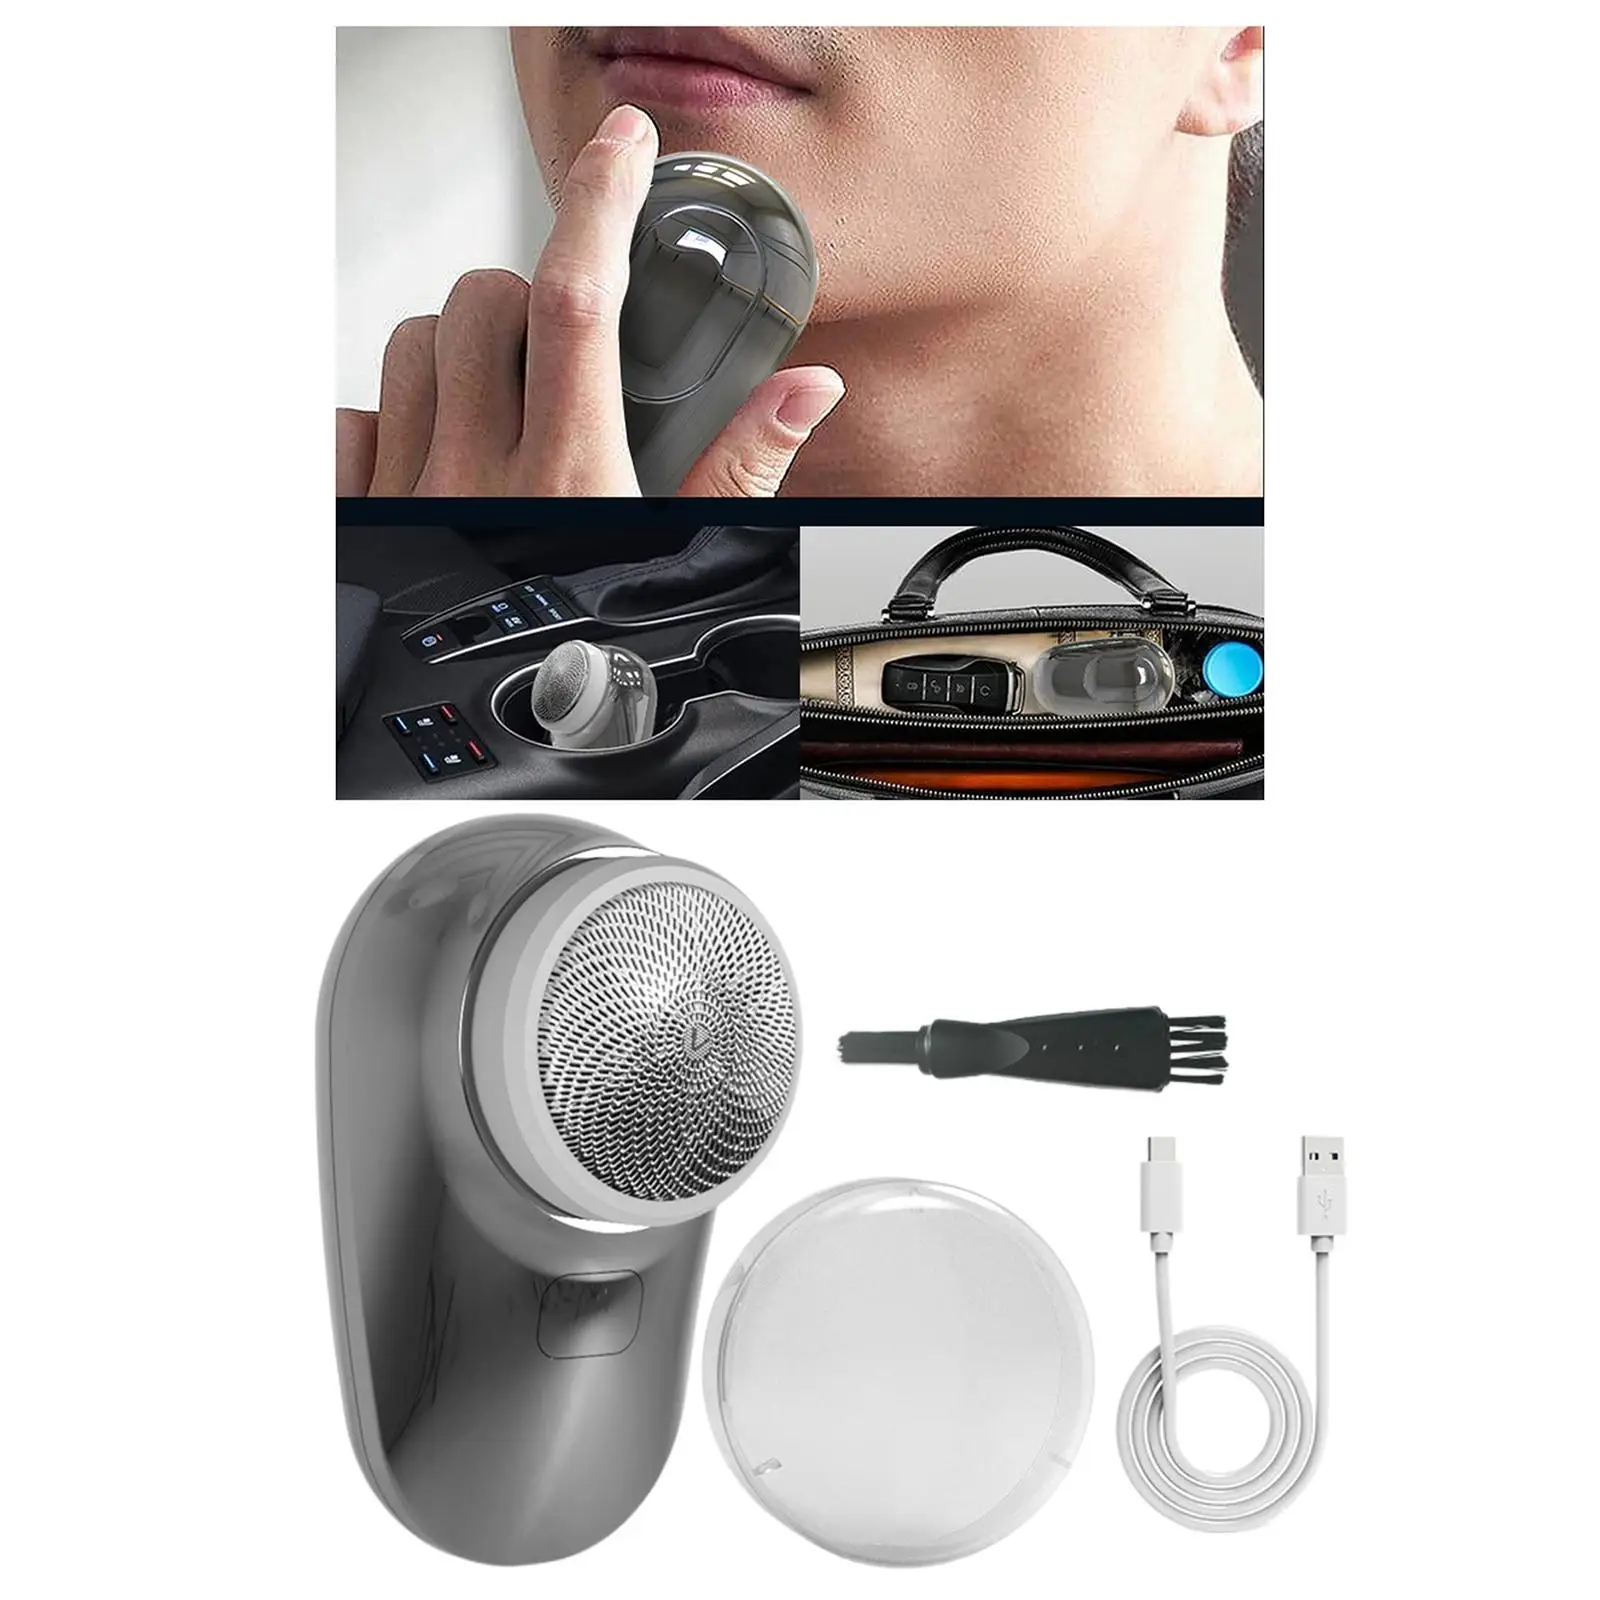 Shaver for Men Mini Shaver Face Cordless Shaver Digital Display Shaver Christmas and New Year Gifts USB Shaver Electric Shaver